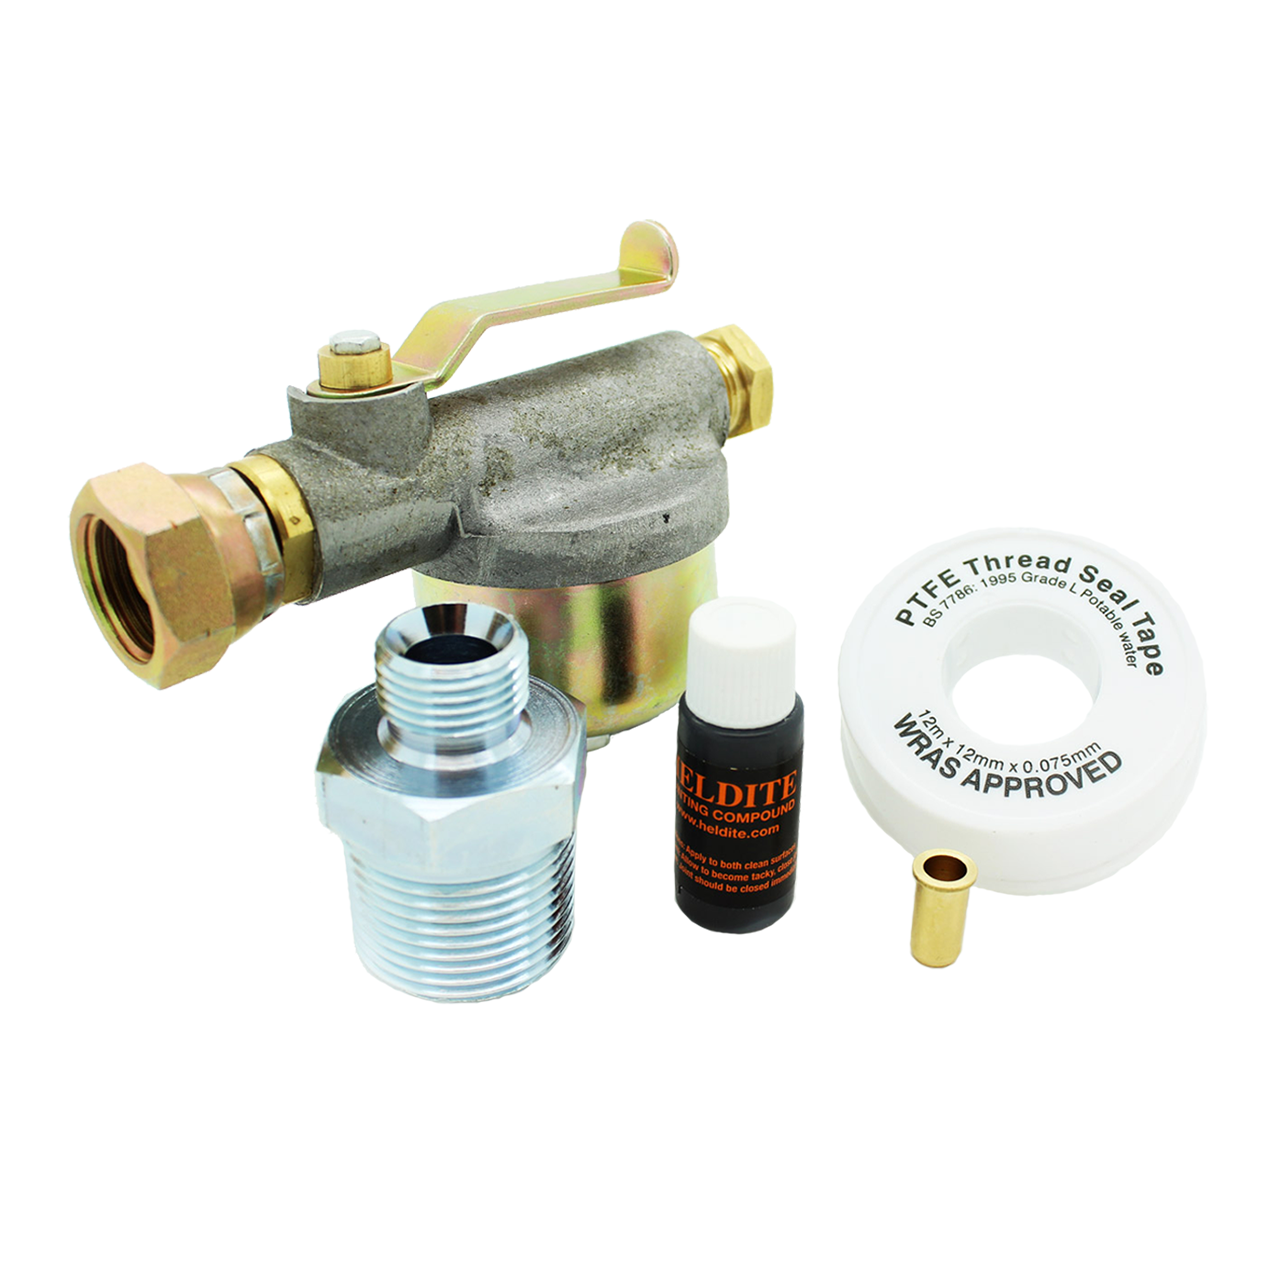 https://fordfuels.co.uk/wp-content/uploads/Atkinson-Inline-Filter-Valve-350x350.png+https://fordfuels.co.uk/wp-content/uploads/Atkinson-Inline-Filter-Valve-700x700.png